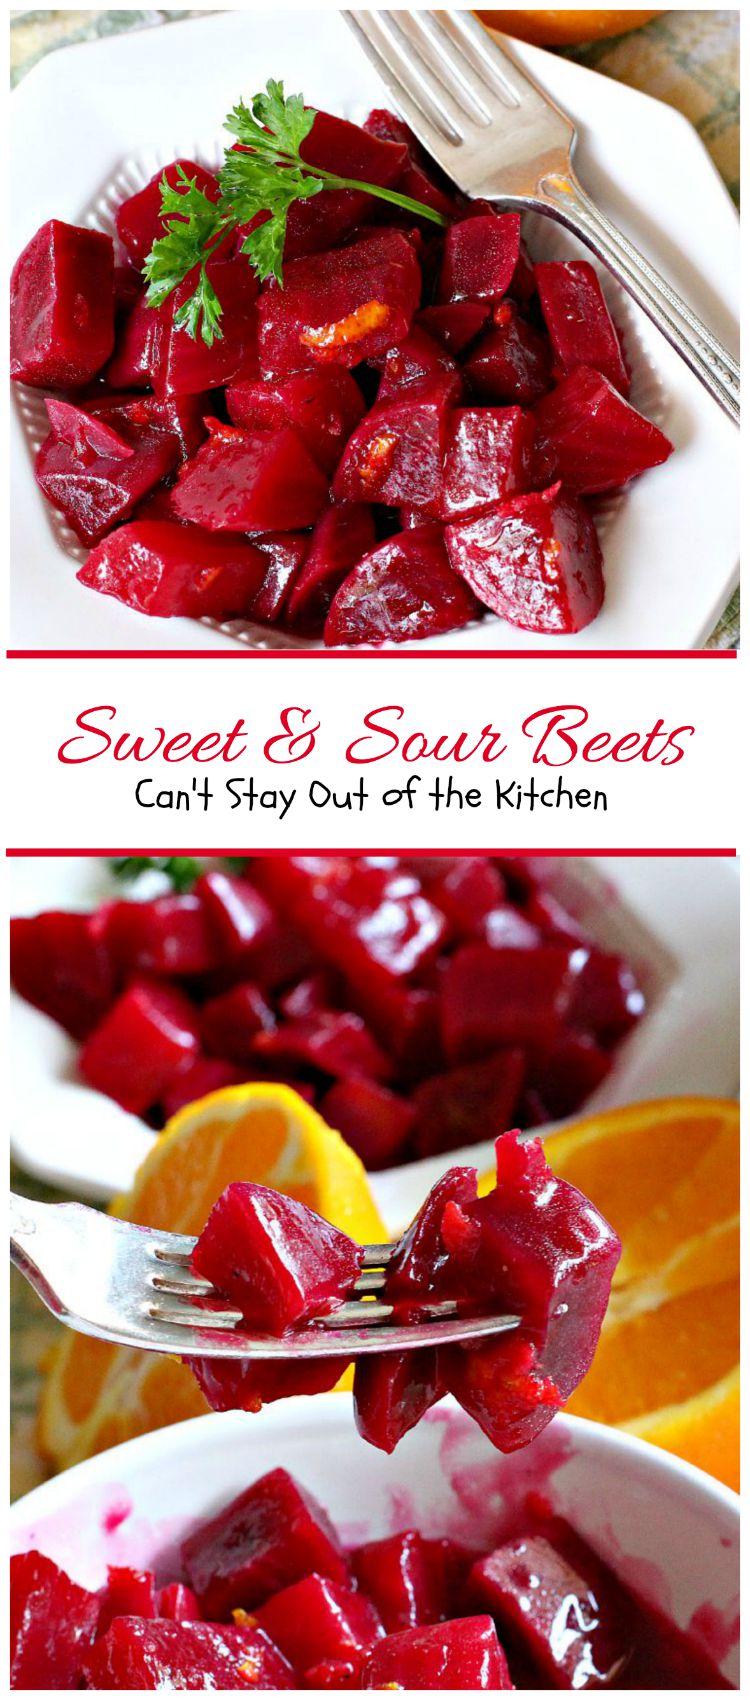 Sweet and Sour Beets | Can't Stay Out of the Kitchen